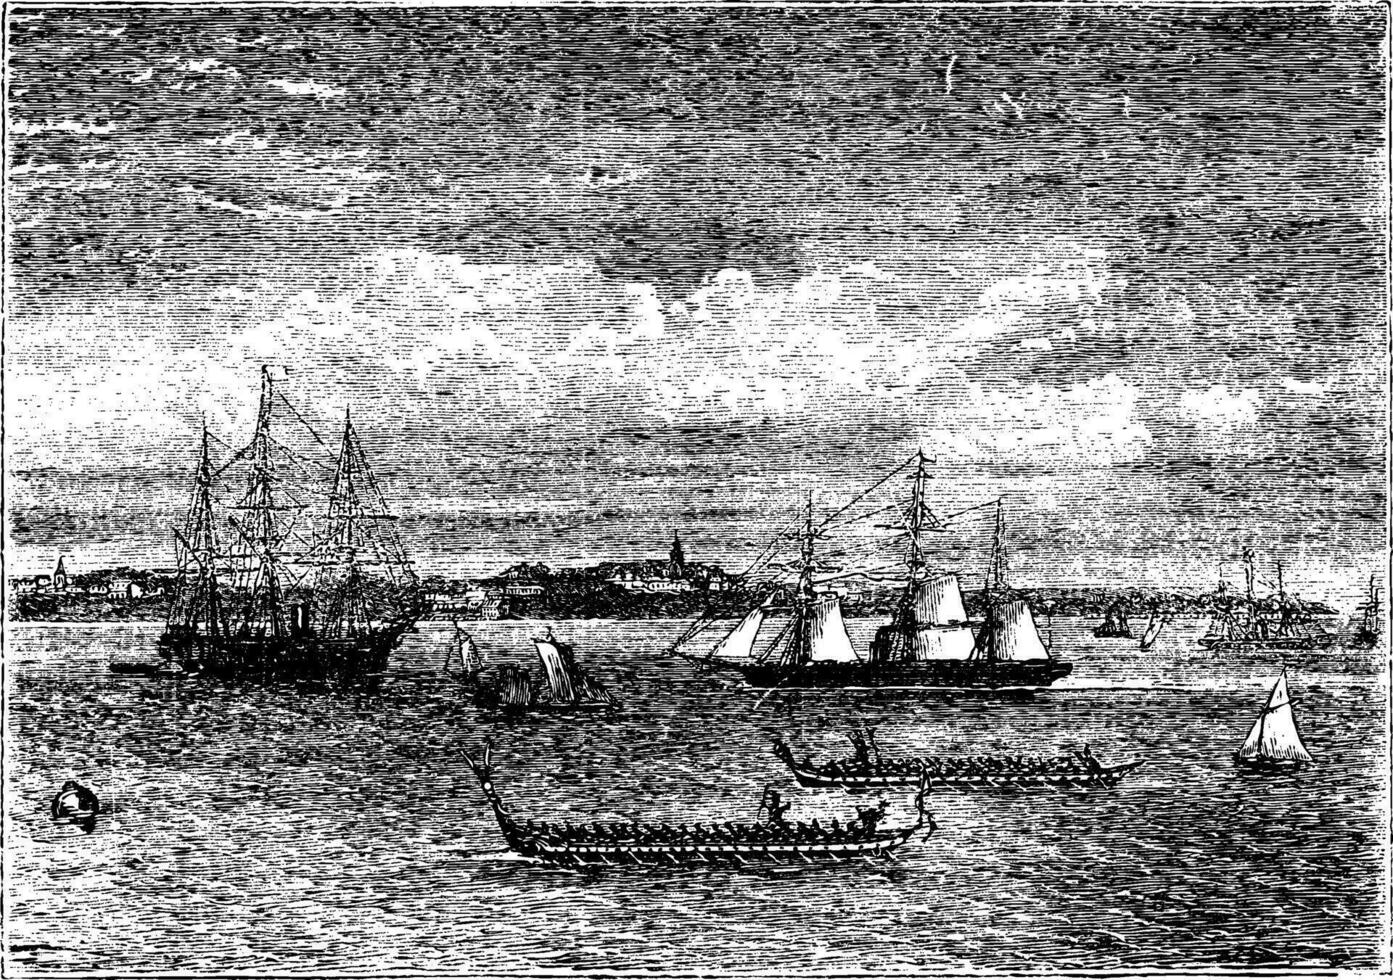 Auckland harbor in the 1890s vintage engraving, New Zealand vector